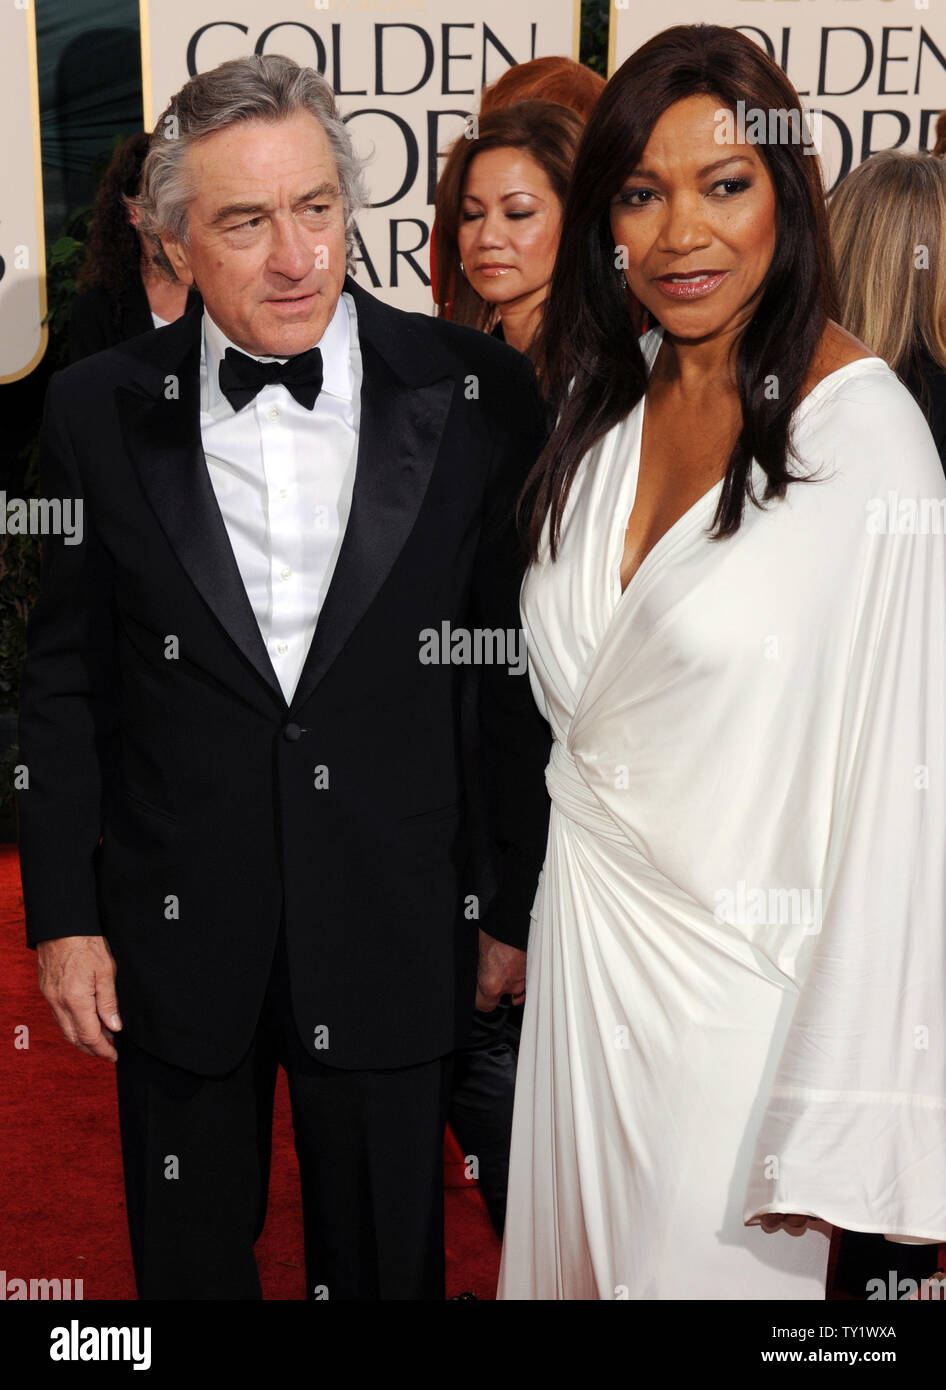 Actor Robert De Niro and his wife Grace Hightower arrive at the 68th annual Golden Globe Awards in Beverly Hills, California on January 16, 2011. De Niro was honored with the Cecil B. DeMille Award.  UPI/Jim Ruymen Stock Photo